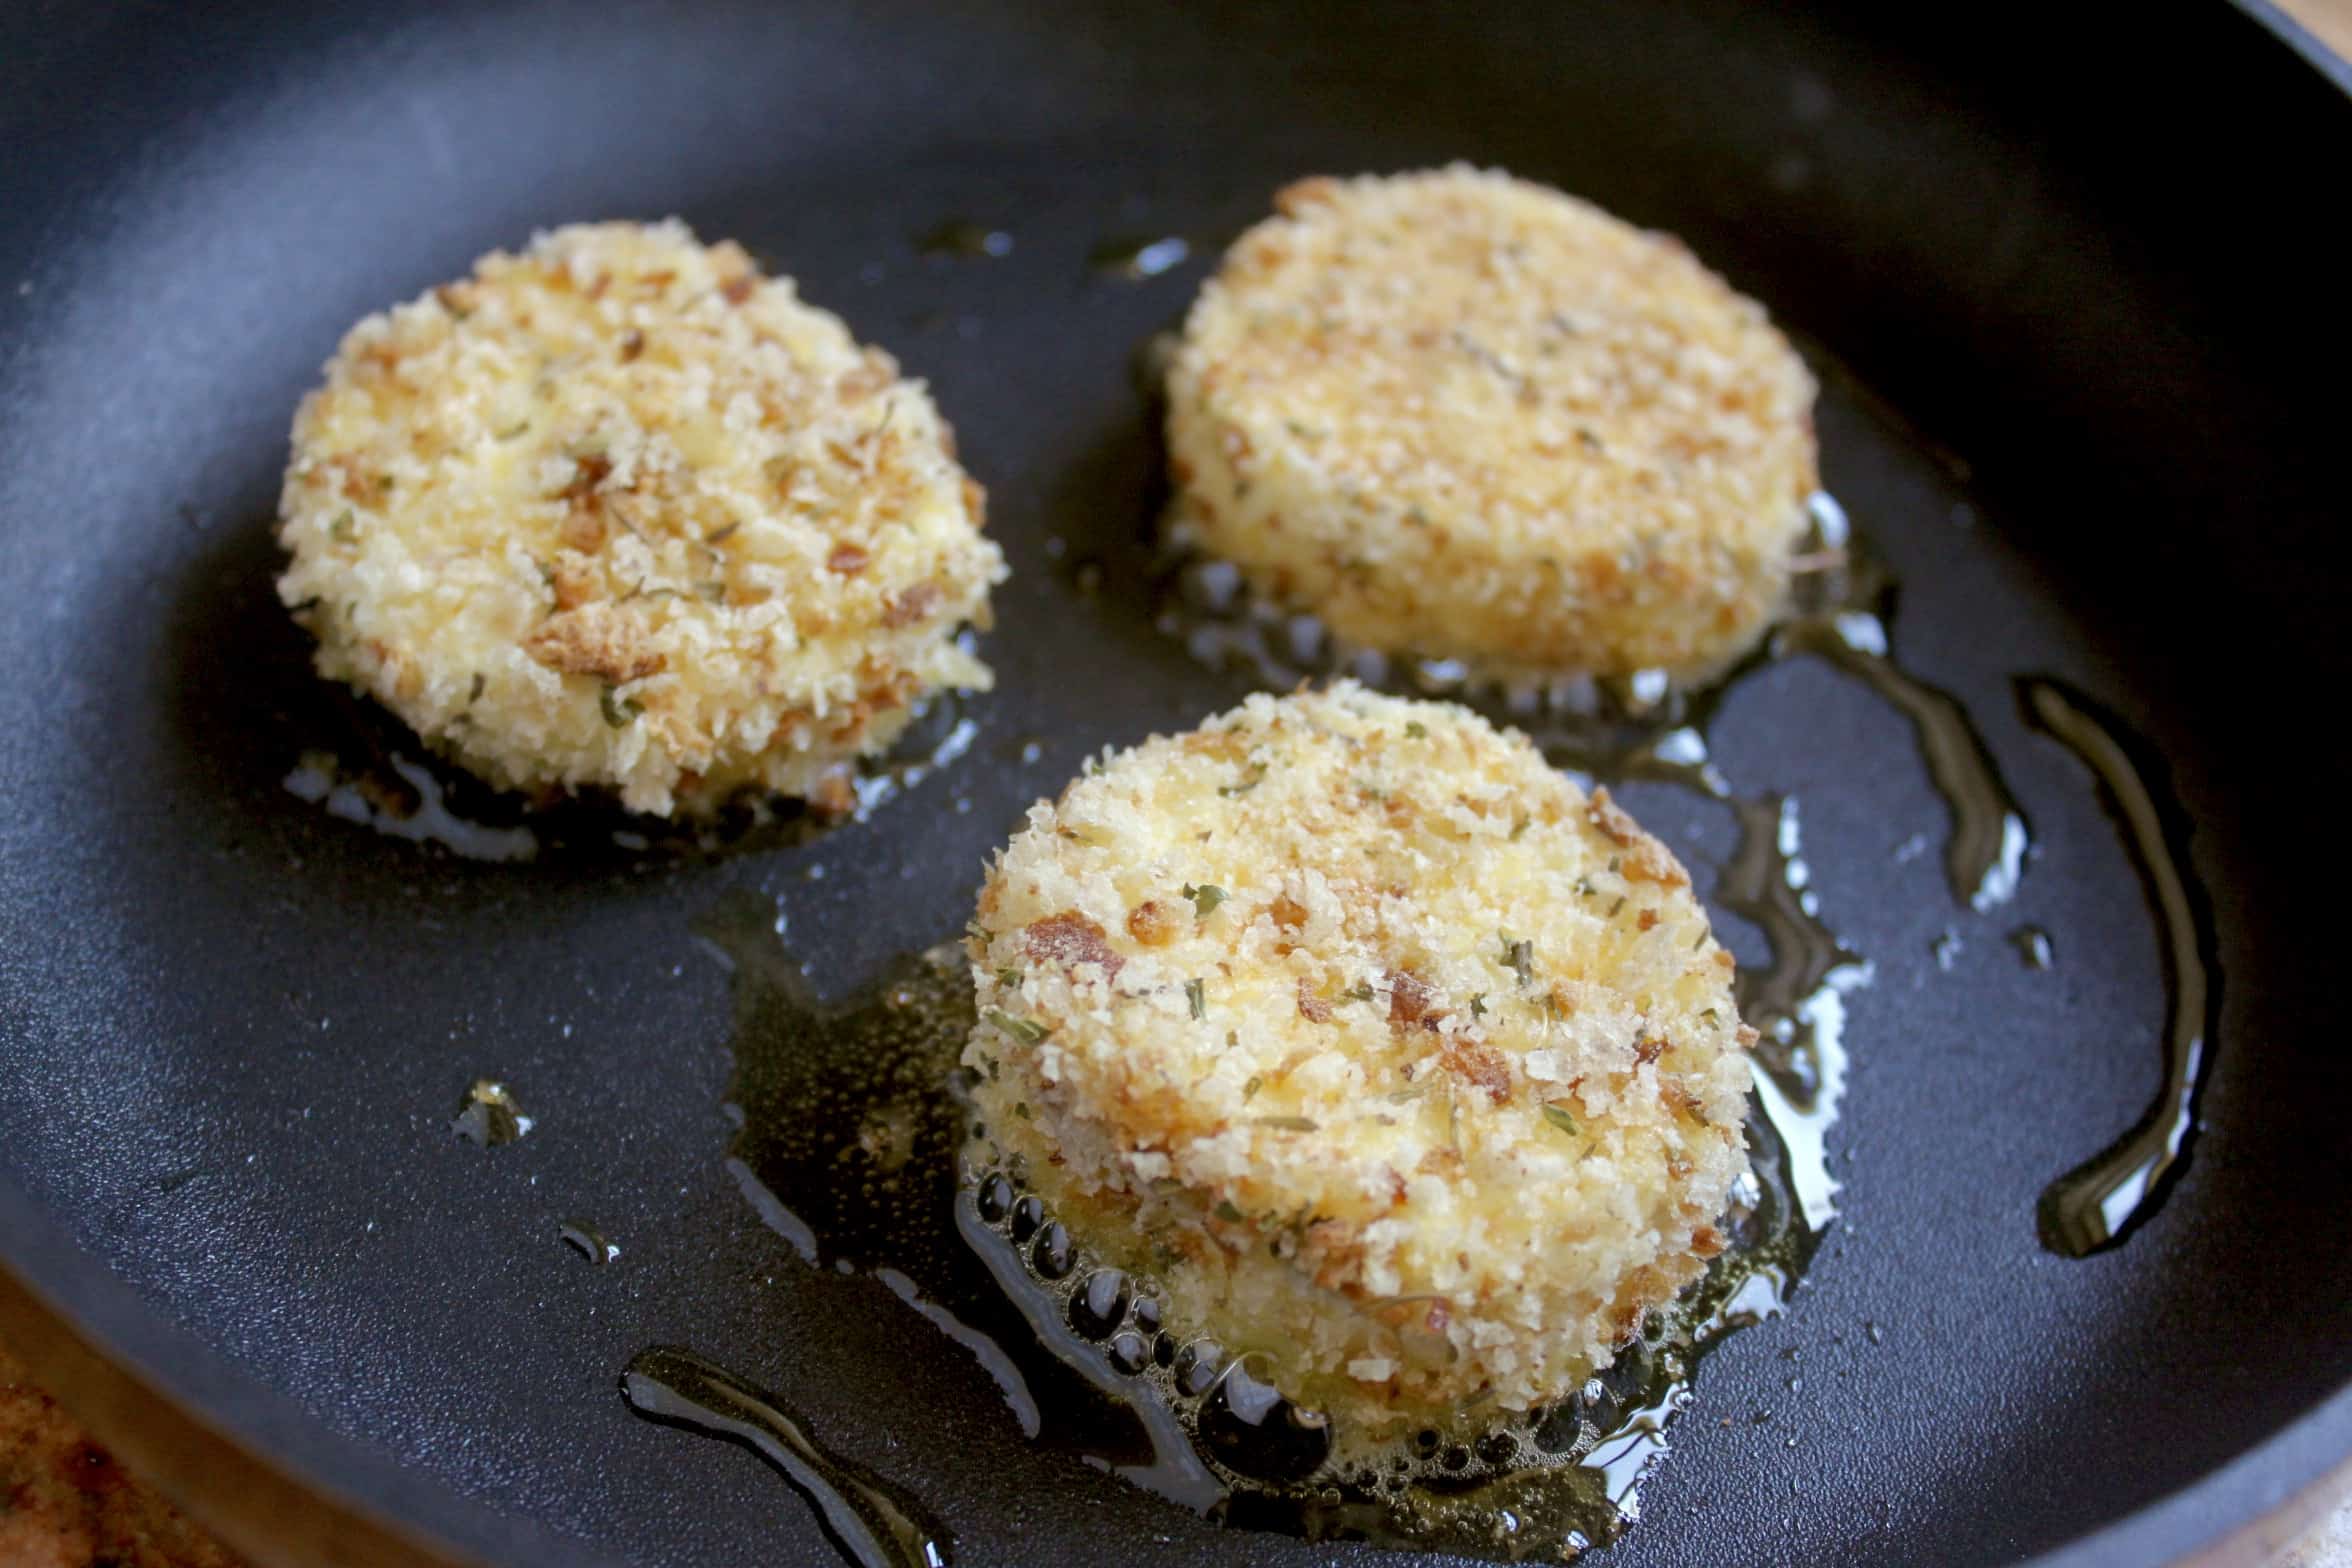 Frying breaded goat cheese